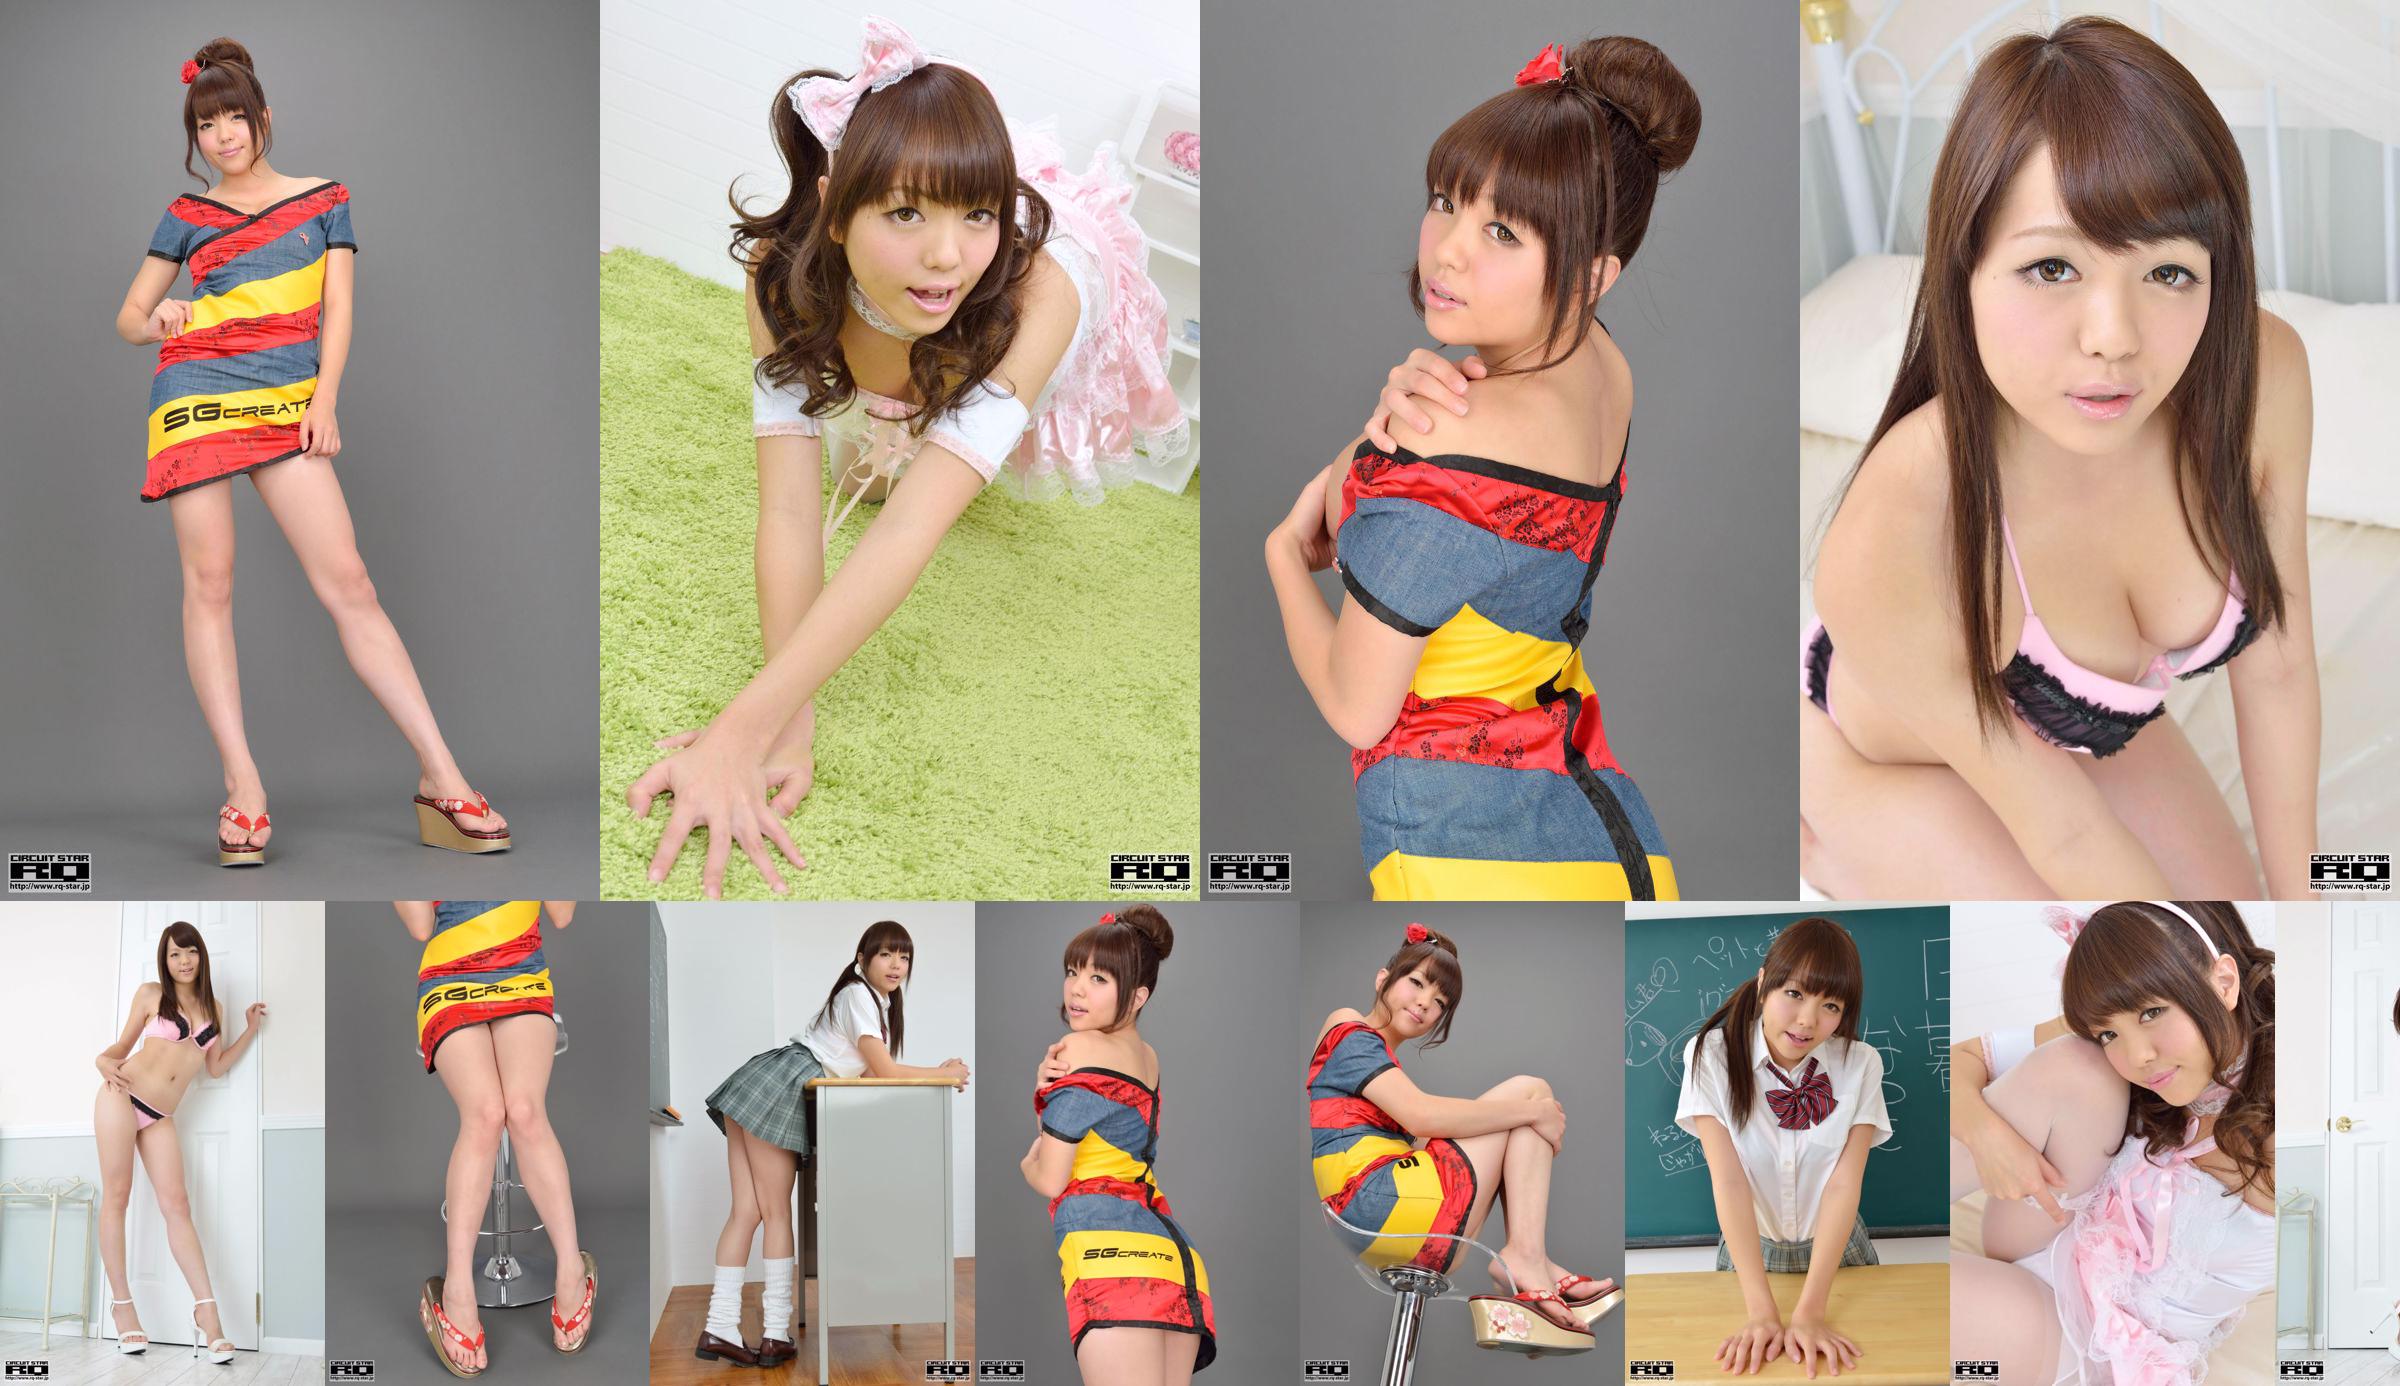 [RQ-STAR] NO.00736 日晚 な つ き Costume Play Lace Beautiful Girl-serie No.386224 Pagina 2